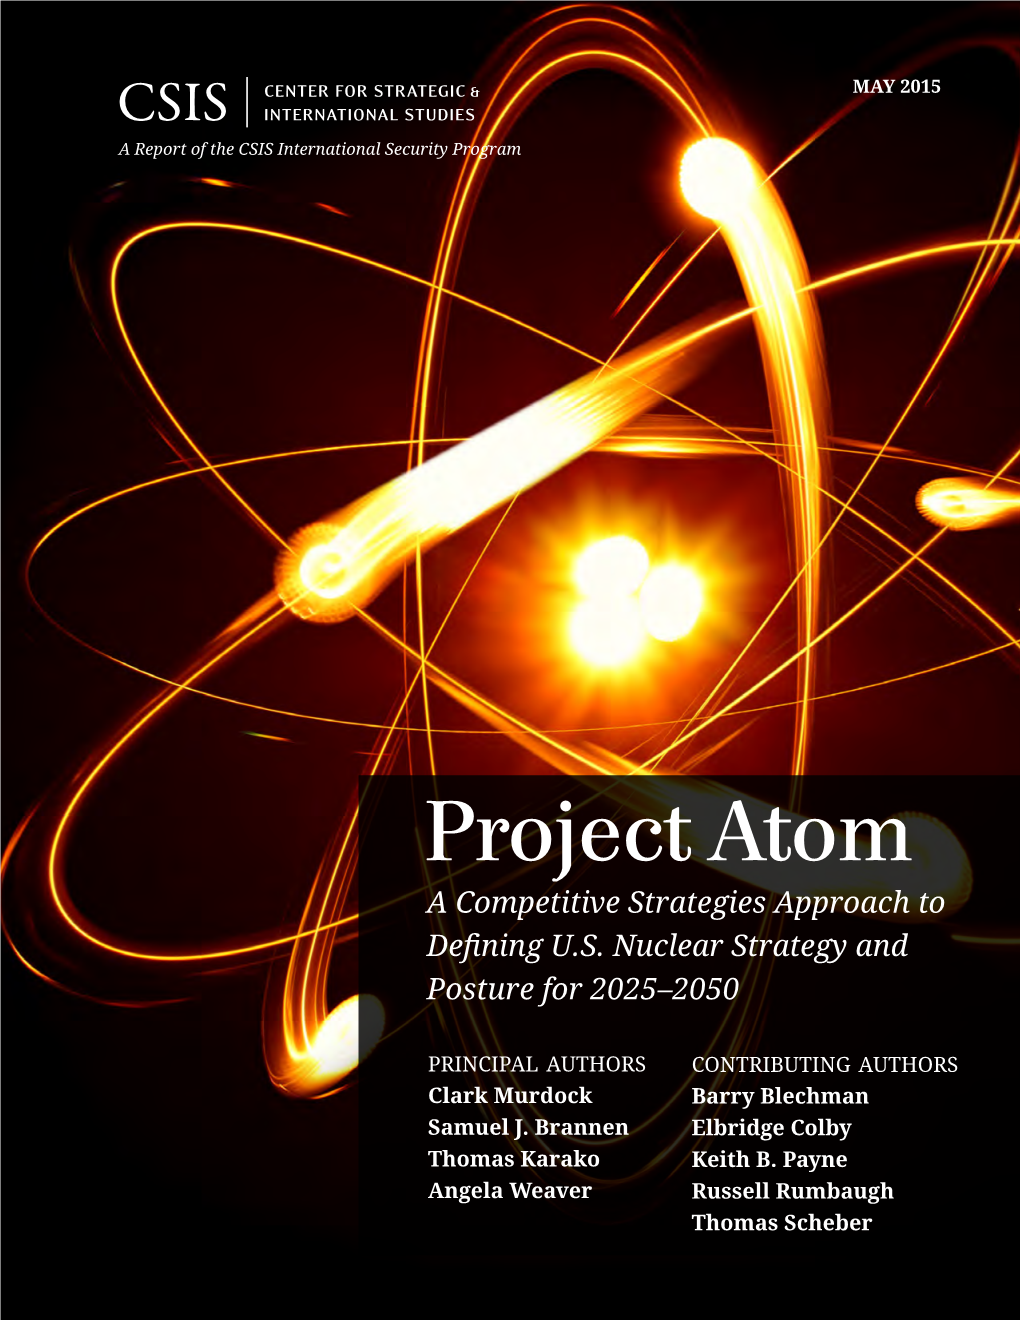 Project Atom a Competitive Strategies Approach to Defining U.S